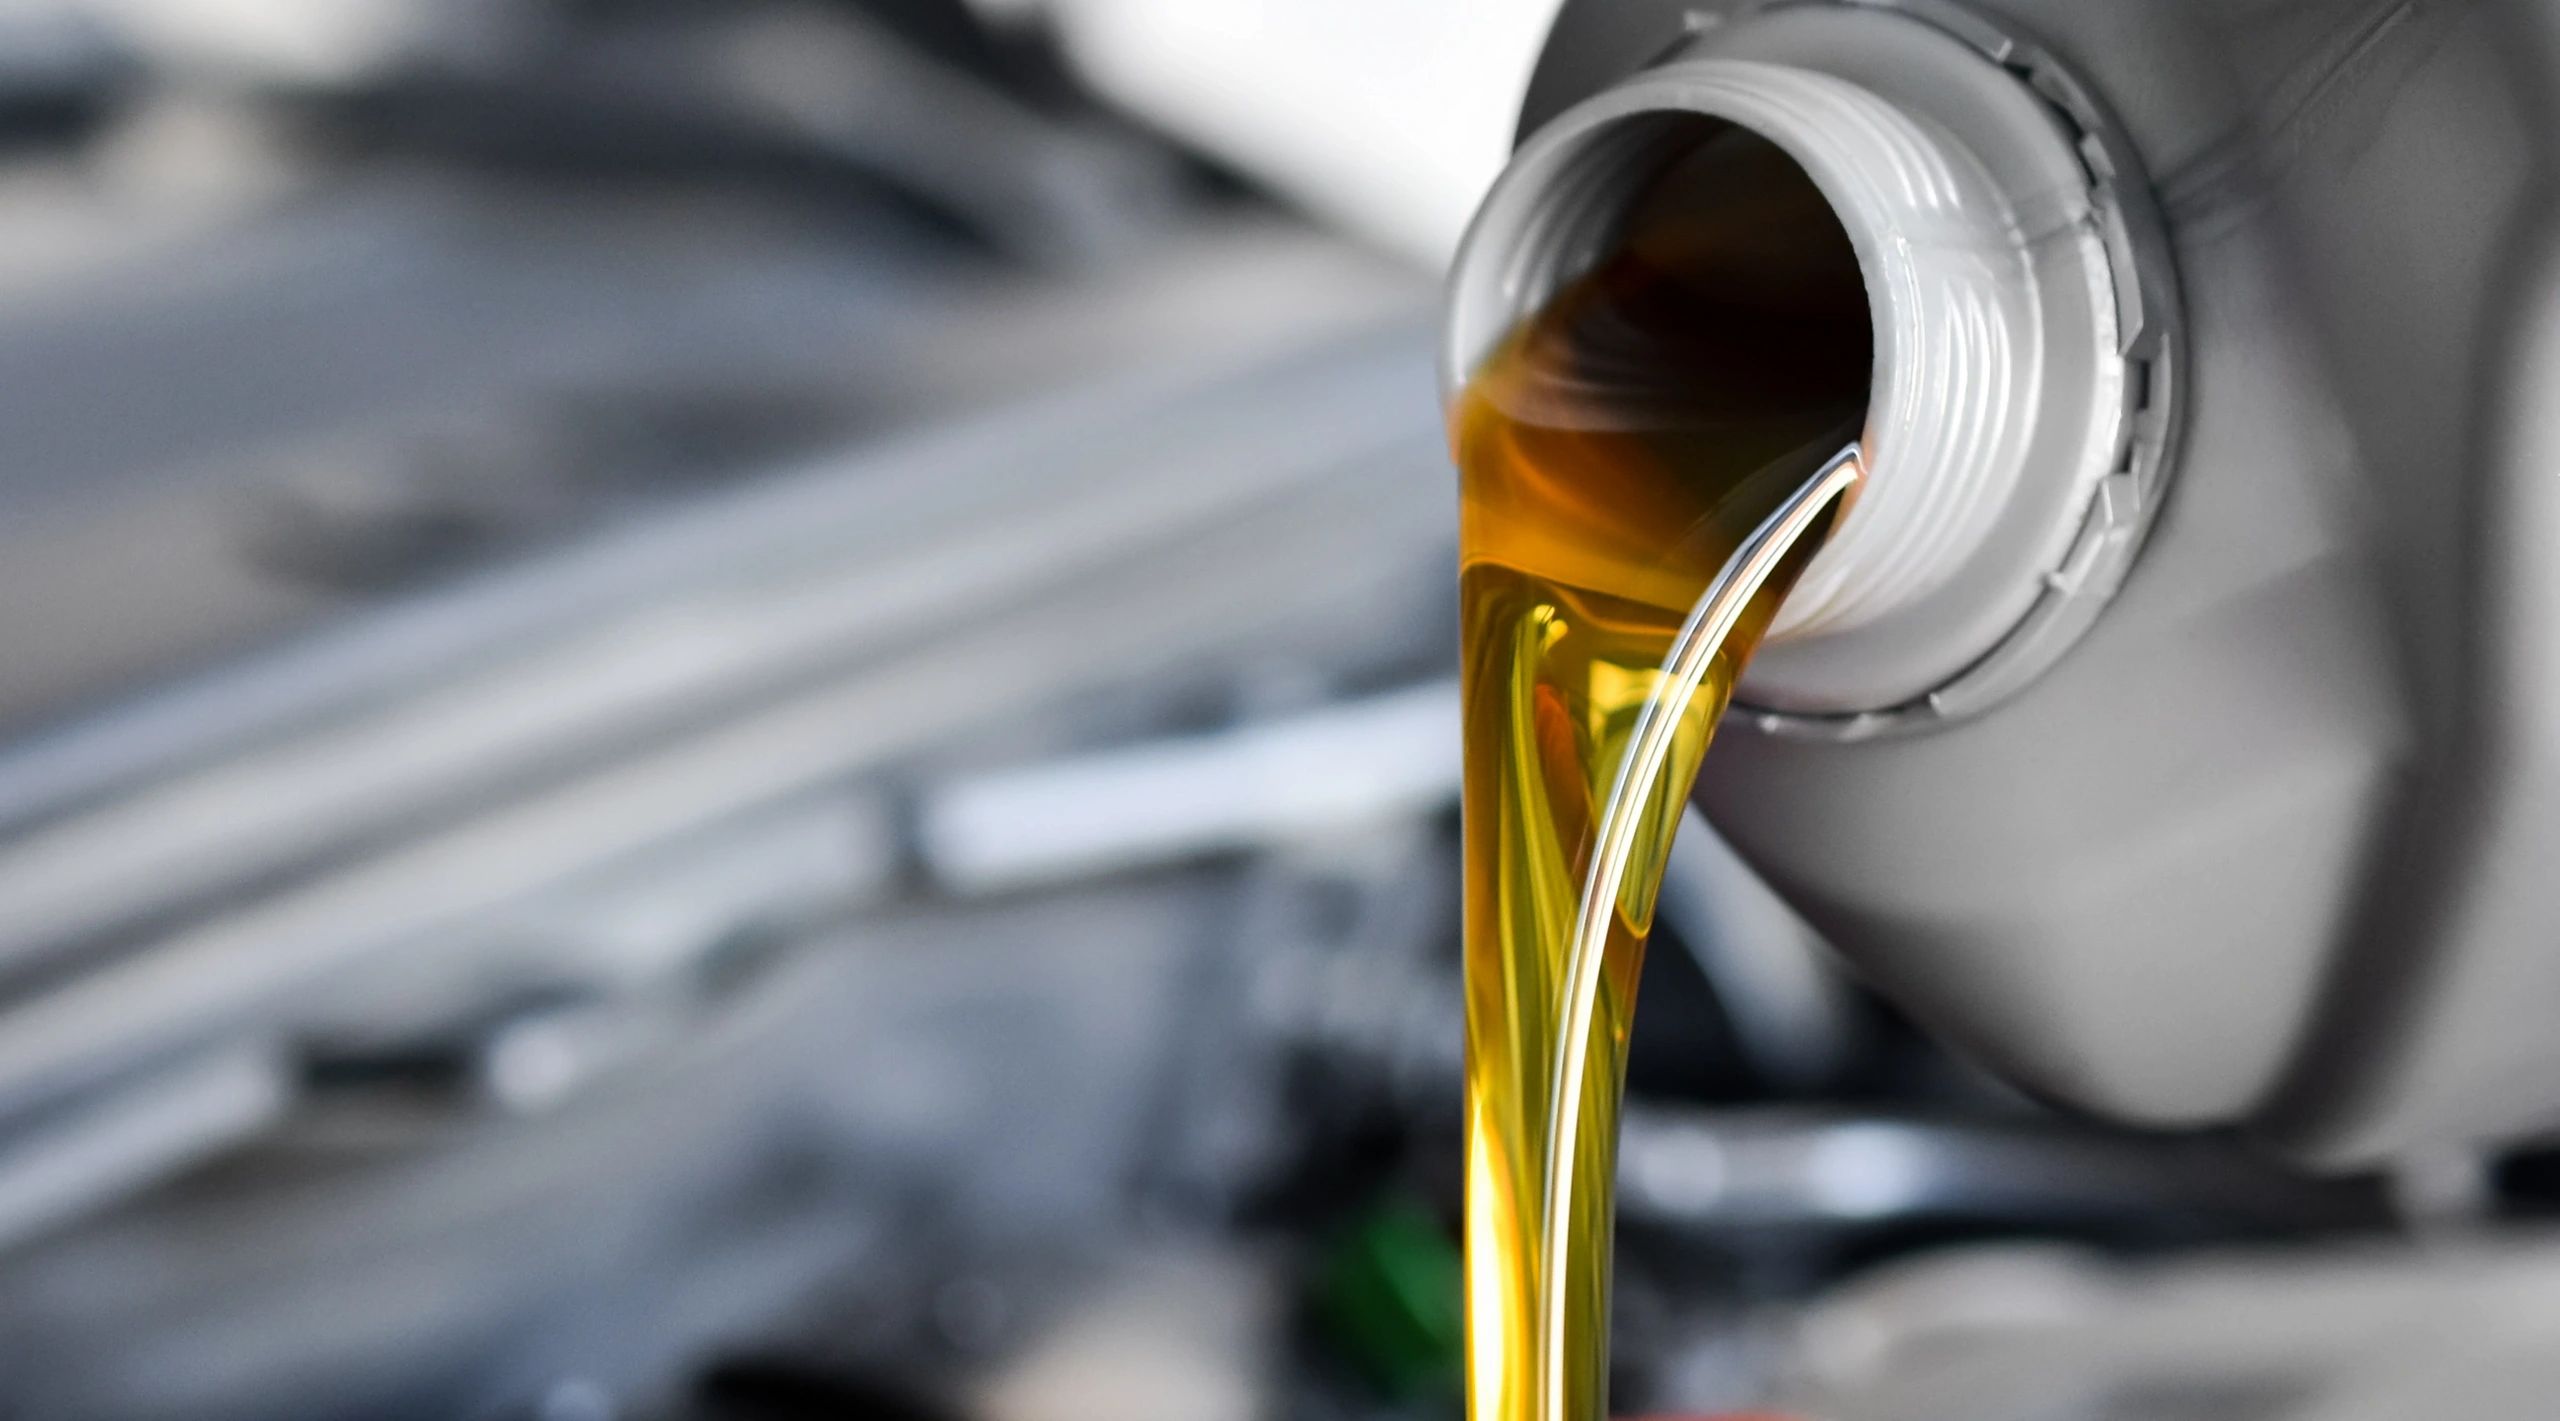 oil change
Pennzoil
north hills pa
mc candles township
15237
